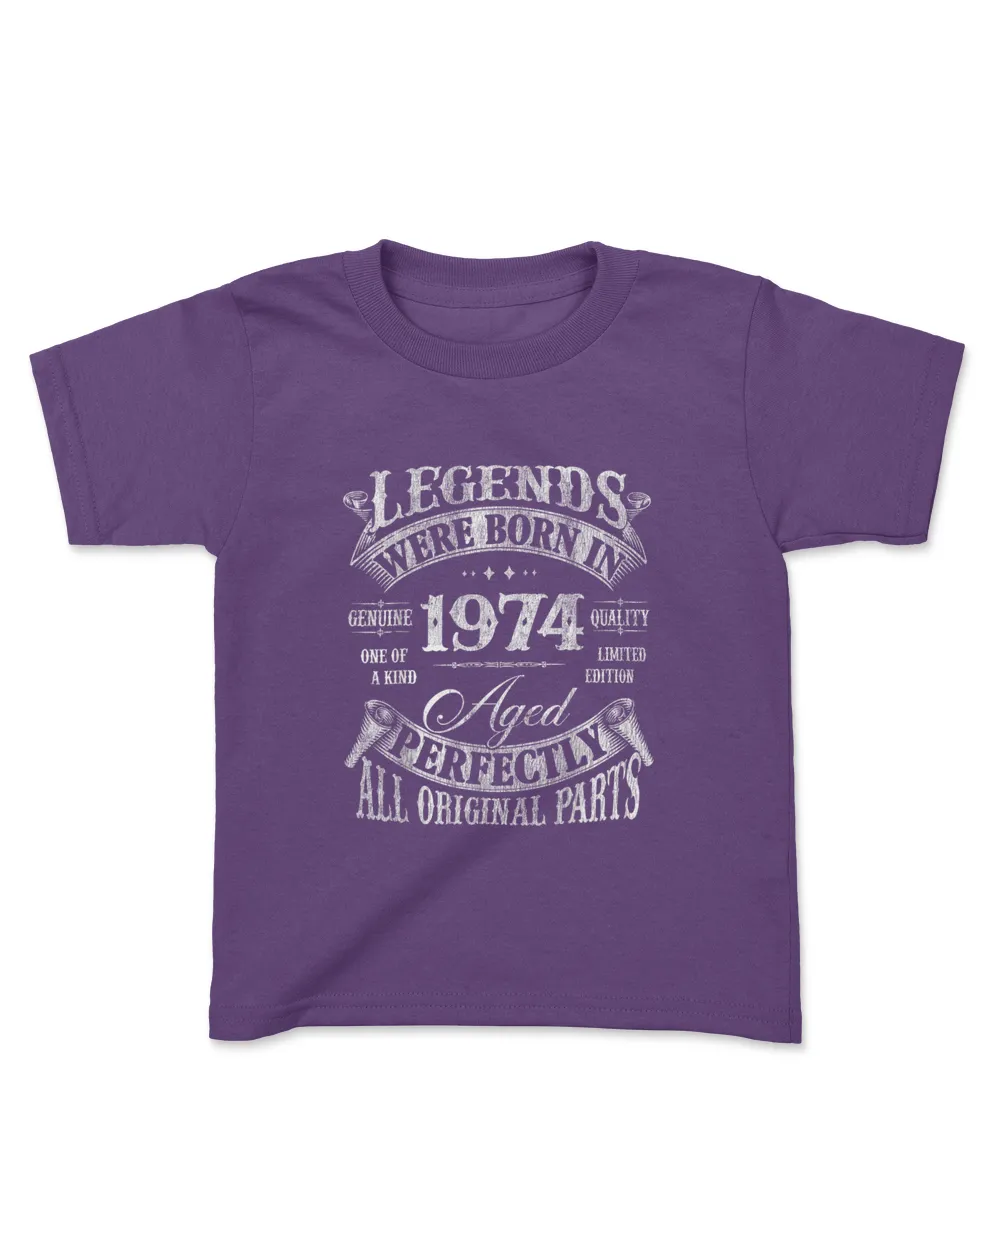 50 Years Old Vintage 1974 50th Birthday Gifts For Men Women T-Shirt